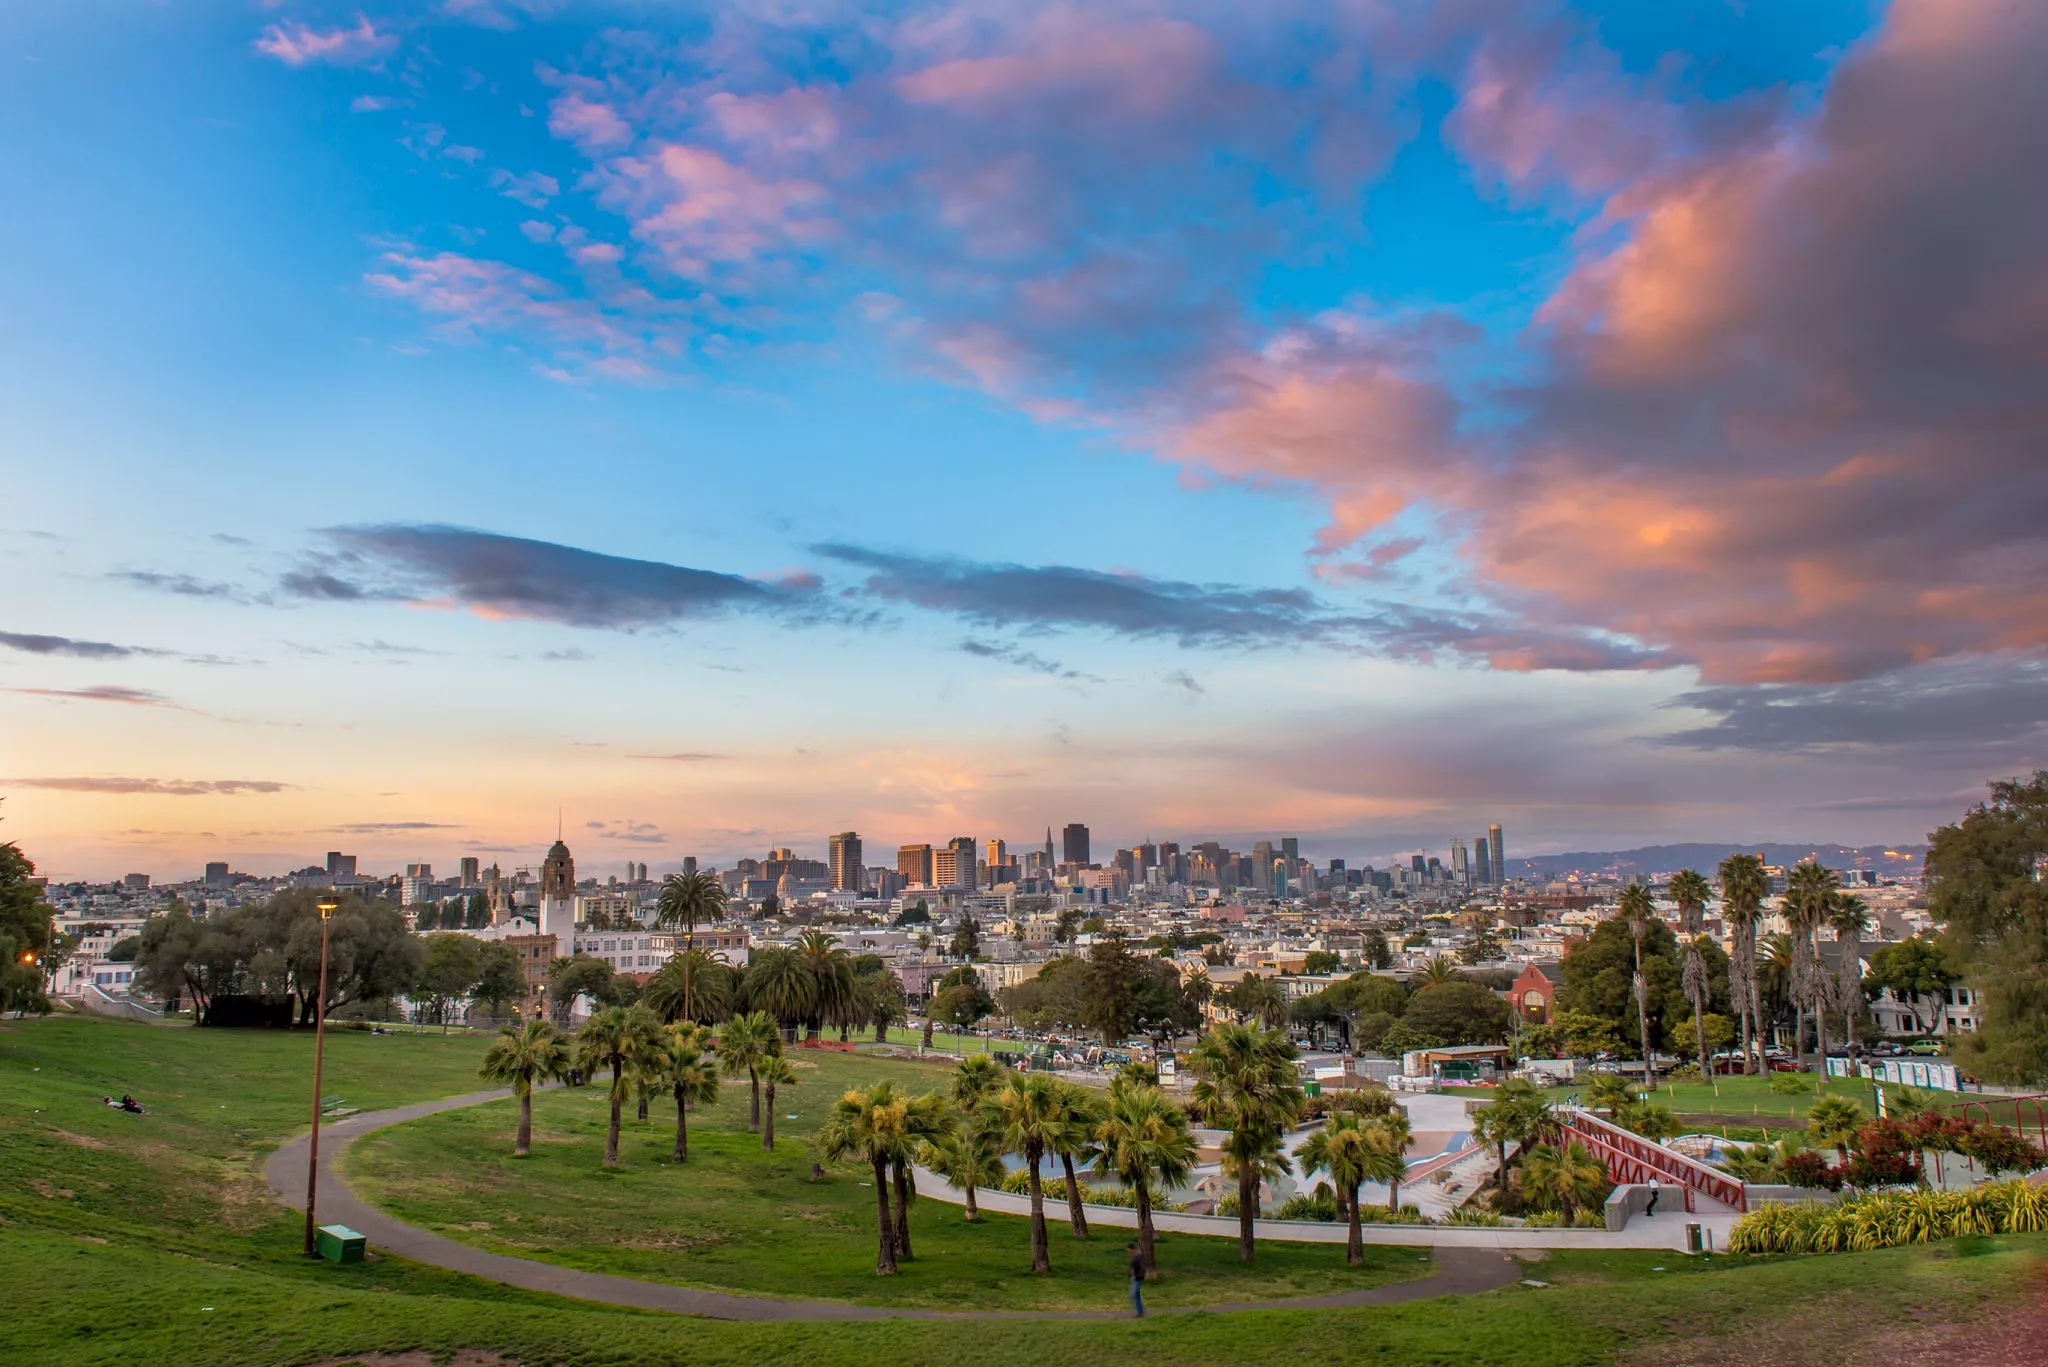 Mission Dolores Park in USA, North America | Parks - Rated 4.1